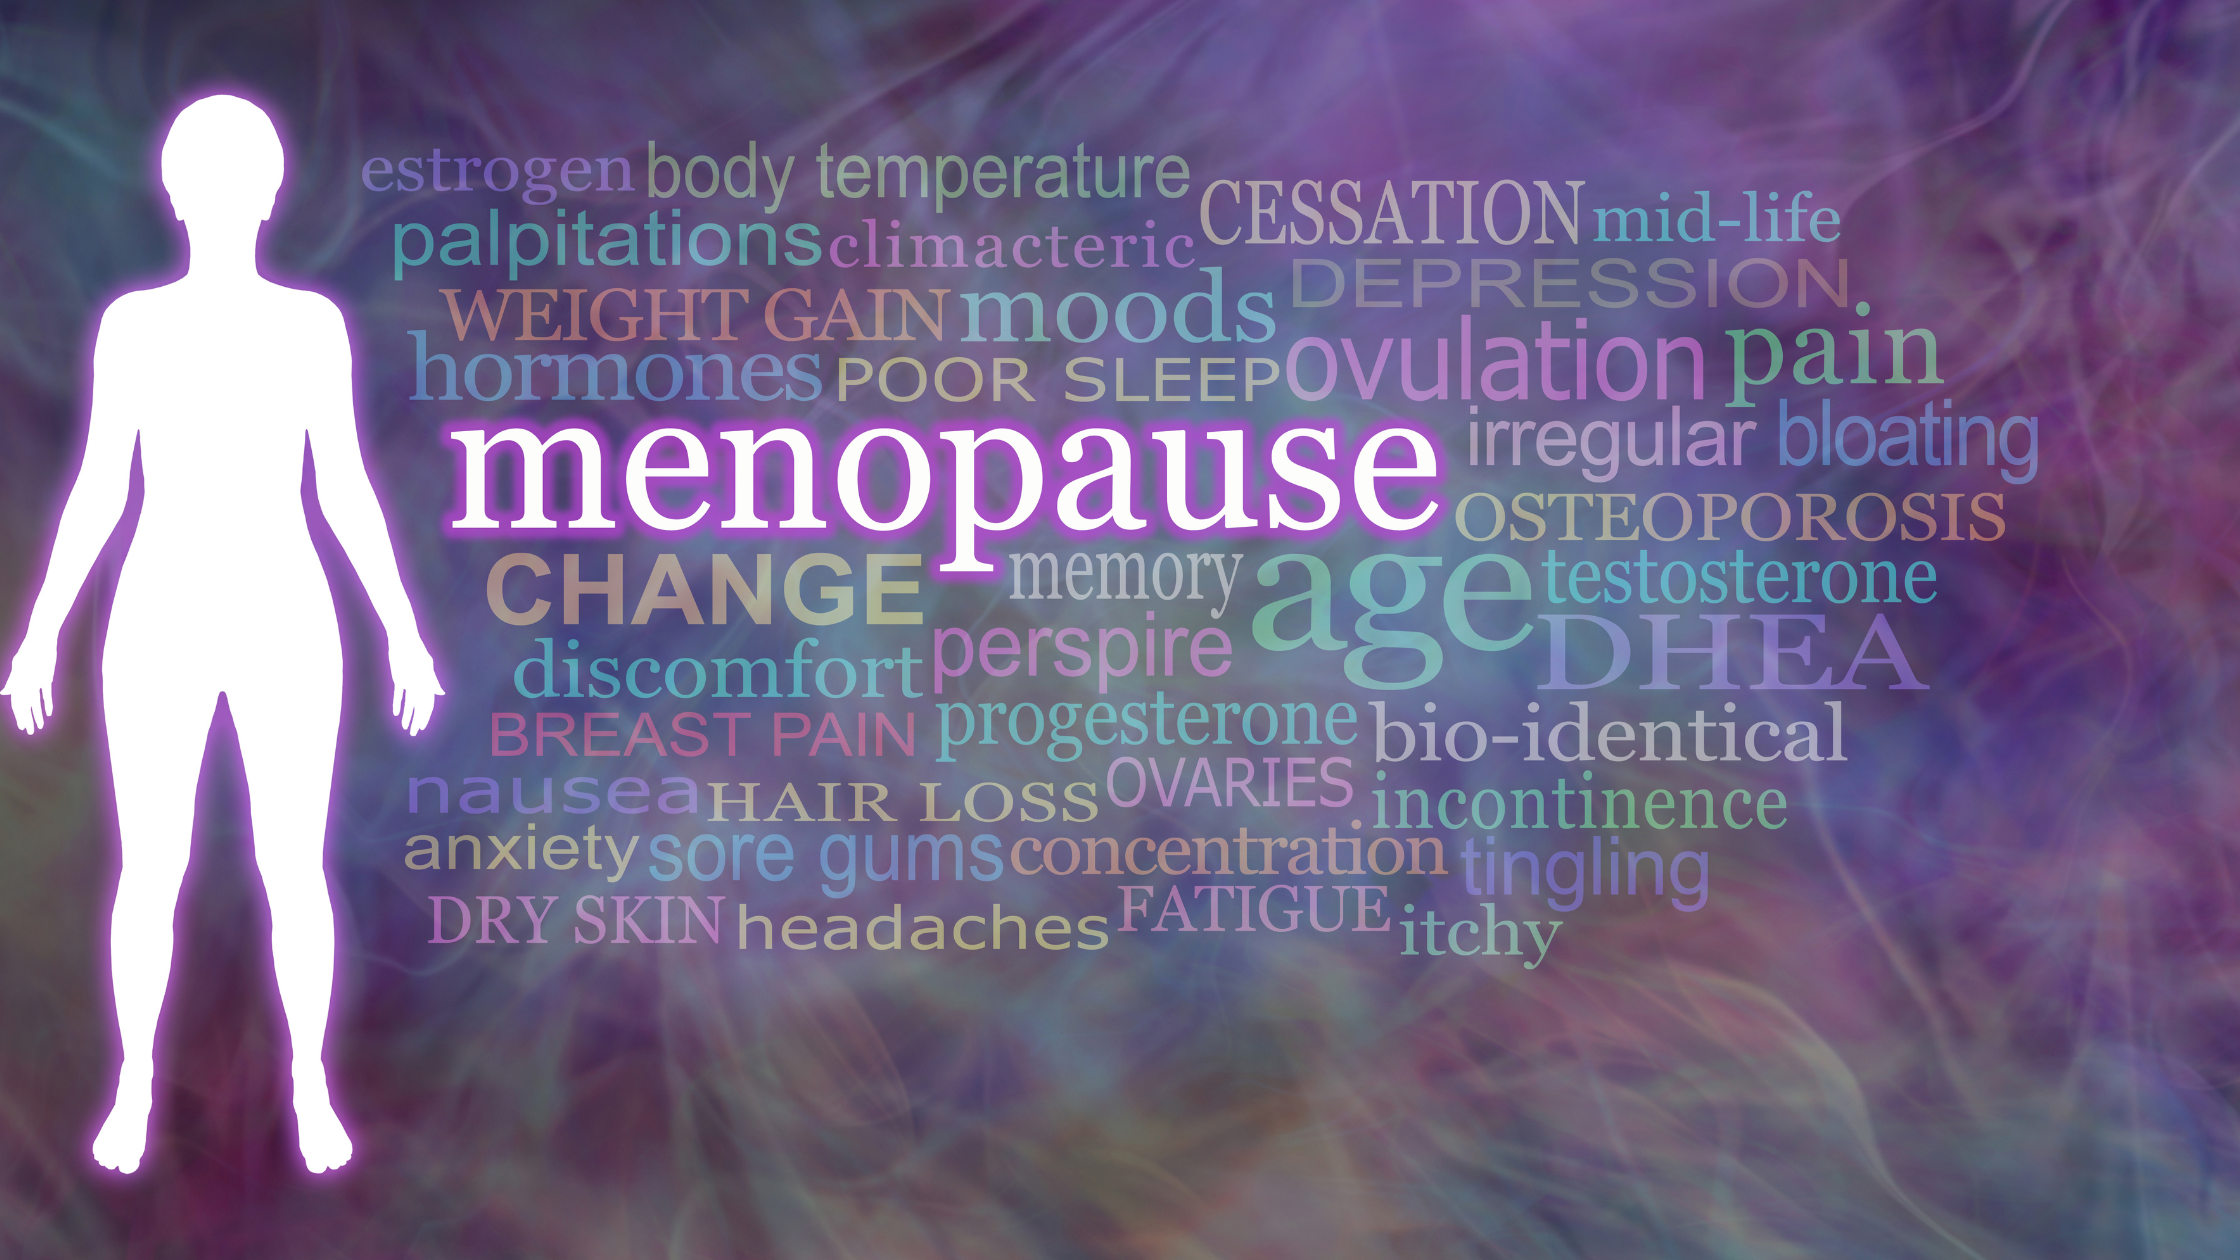 what is menopause?